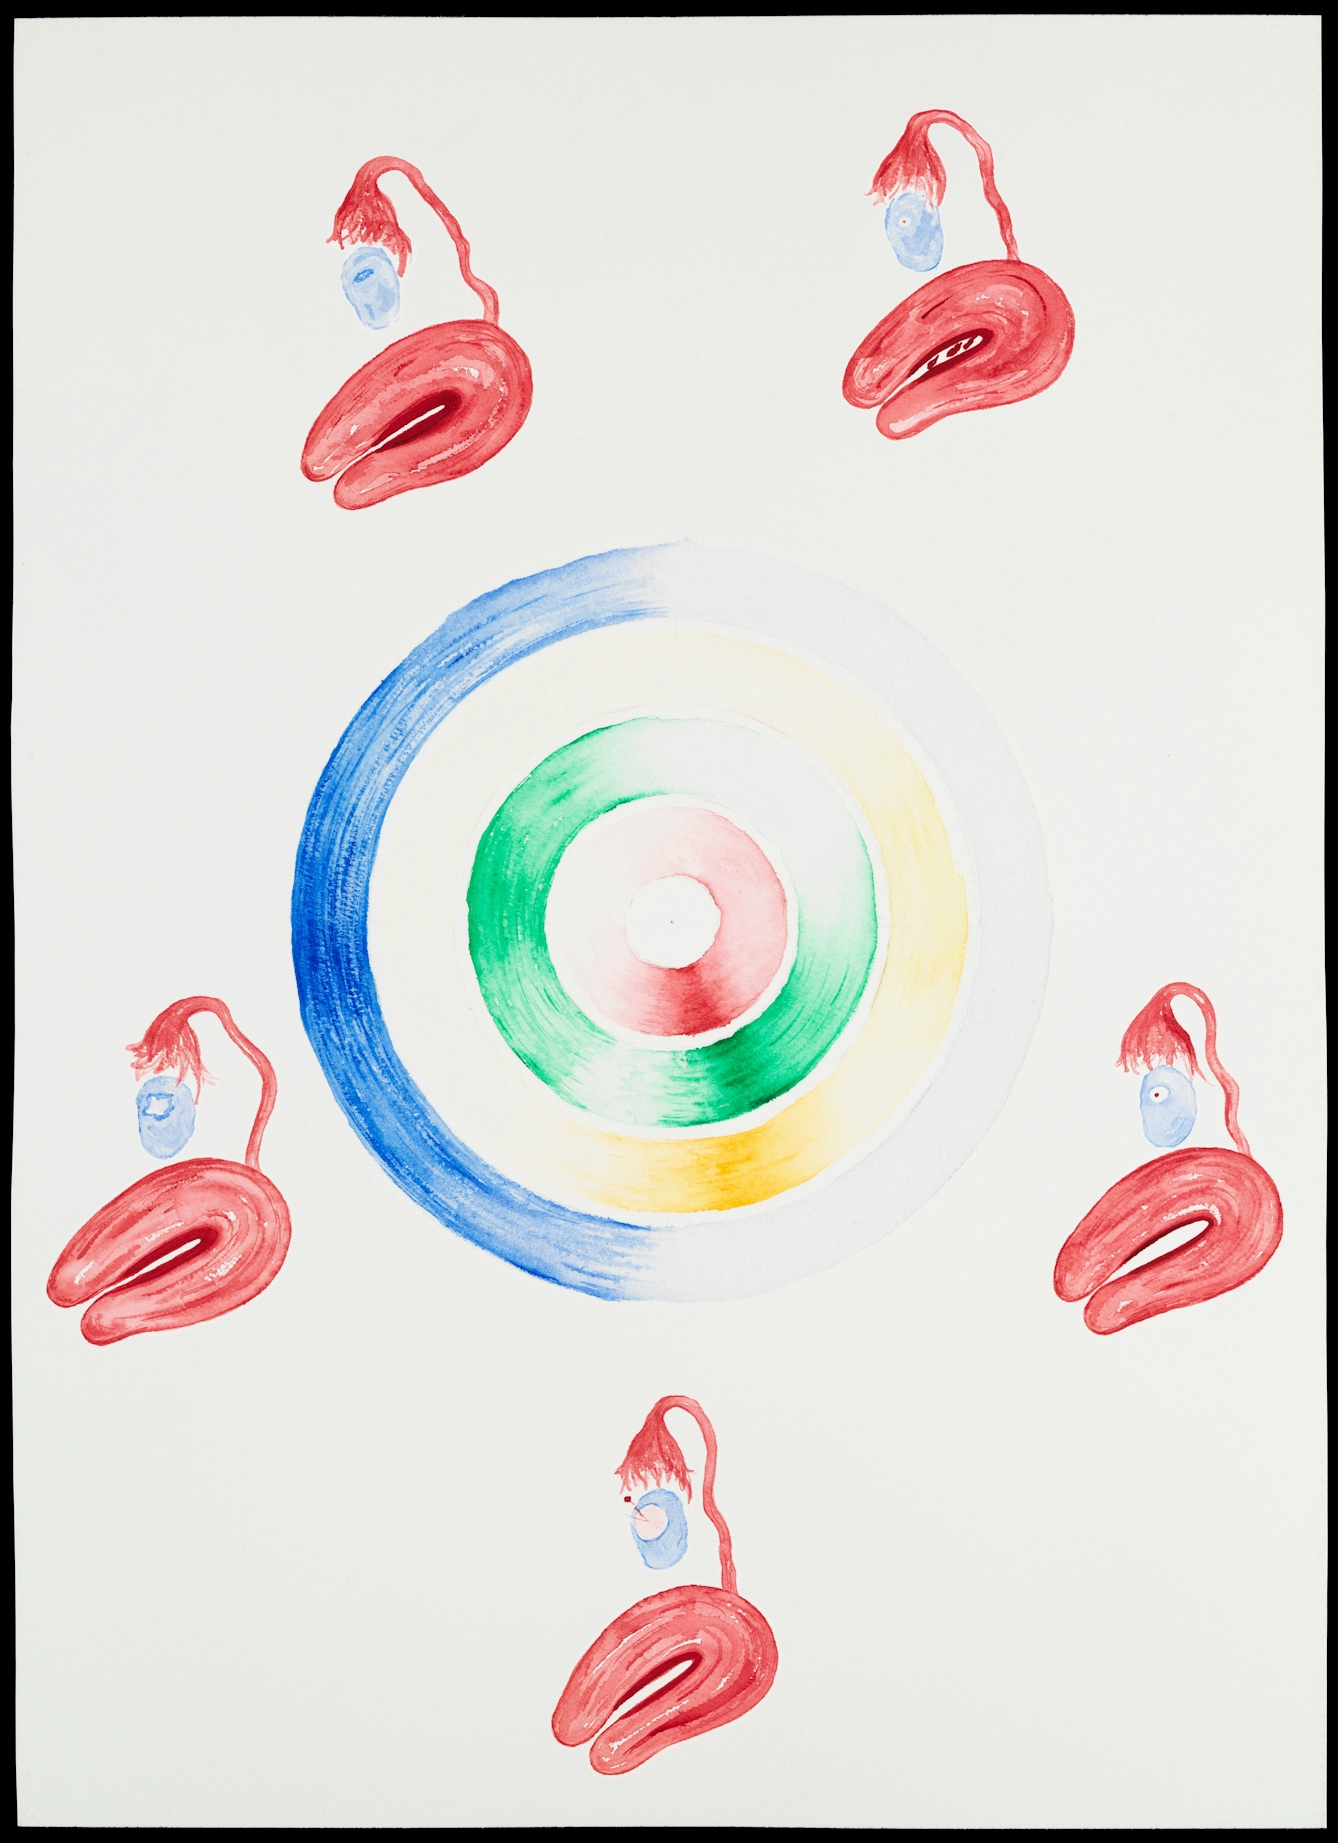 Painting showing the stages and relationship between events during a female menstrual cycle. The central disk reads clockwise from the top, starting at day 1 of the cycle. The levels of each of the four main hormones are represented by the four coloured discs. Red = follicle stimulating hormone, green = oestrogen, yellow = lutinizing hormone and blue = progesterone. The intensity of each colour denotes the concentration of the hormone in the blood. The five surrounding illustrations show the corresponding changes in the ovary and the lining of the uterus (endometrium) as it prepares for potential pregnancy.